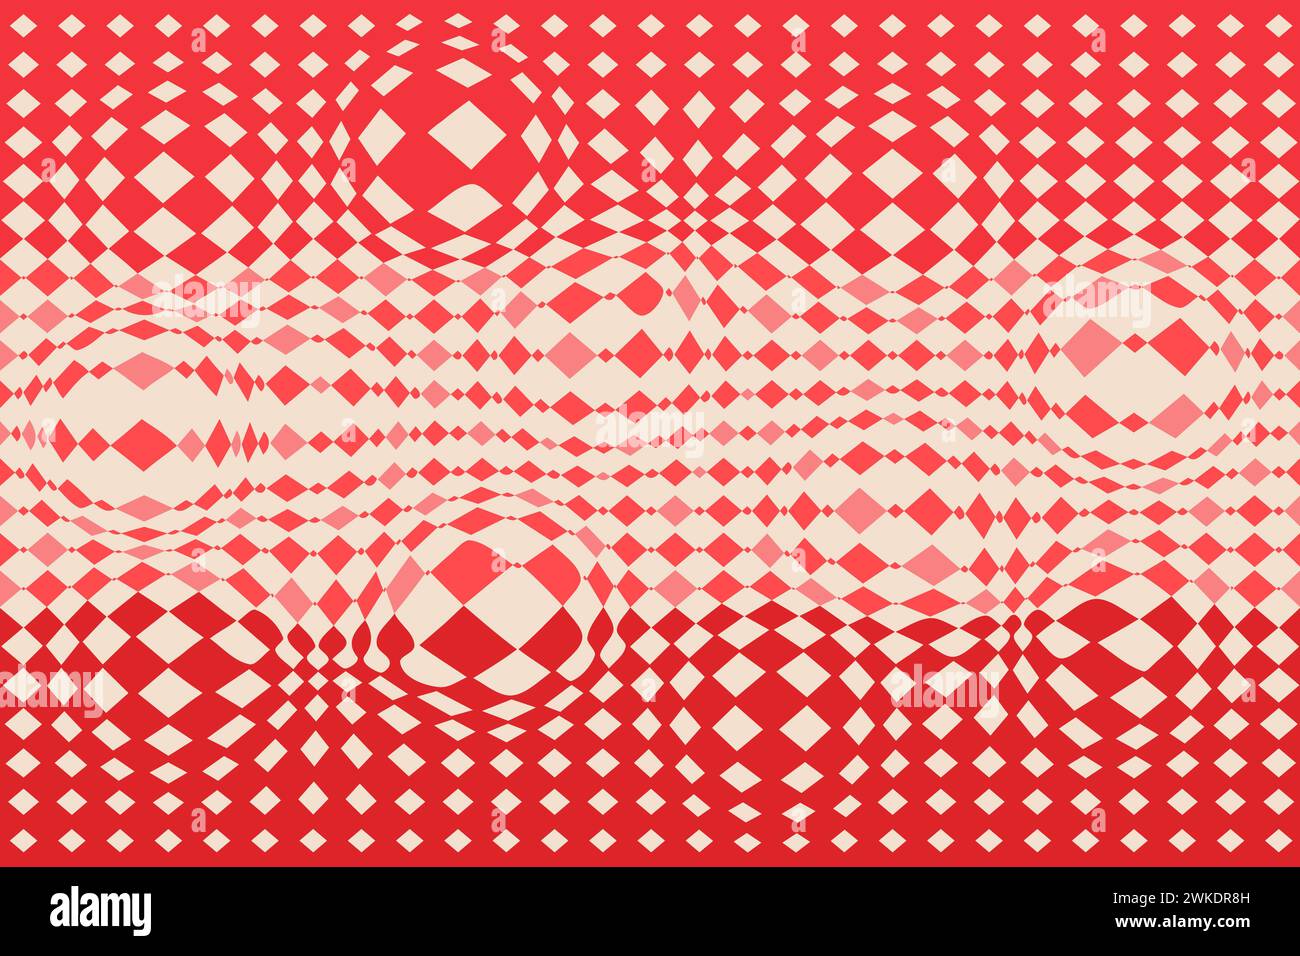 Psychedelic retro pattern with distorted checkerboard. Groovy seamless rectangle background. Pink red color. Vintage wallpaper. Vector illustration. Stock Vector